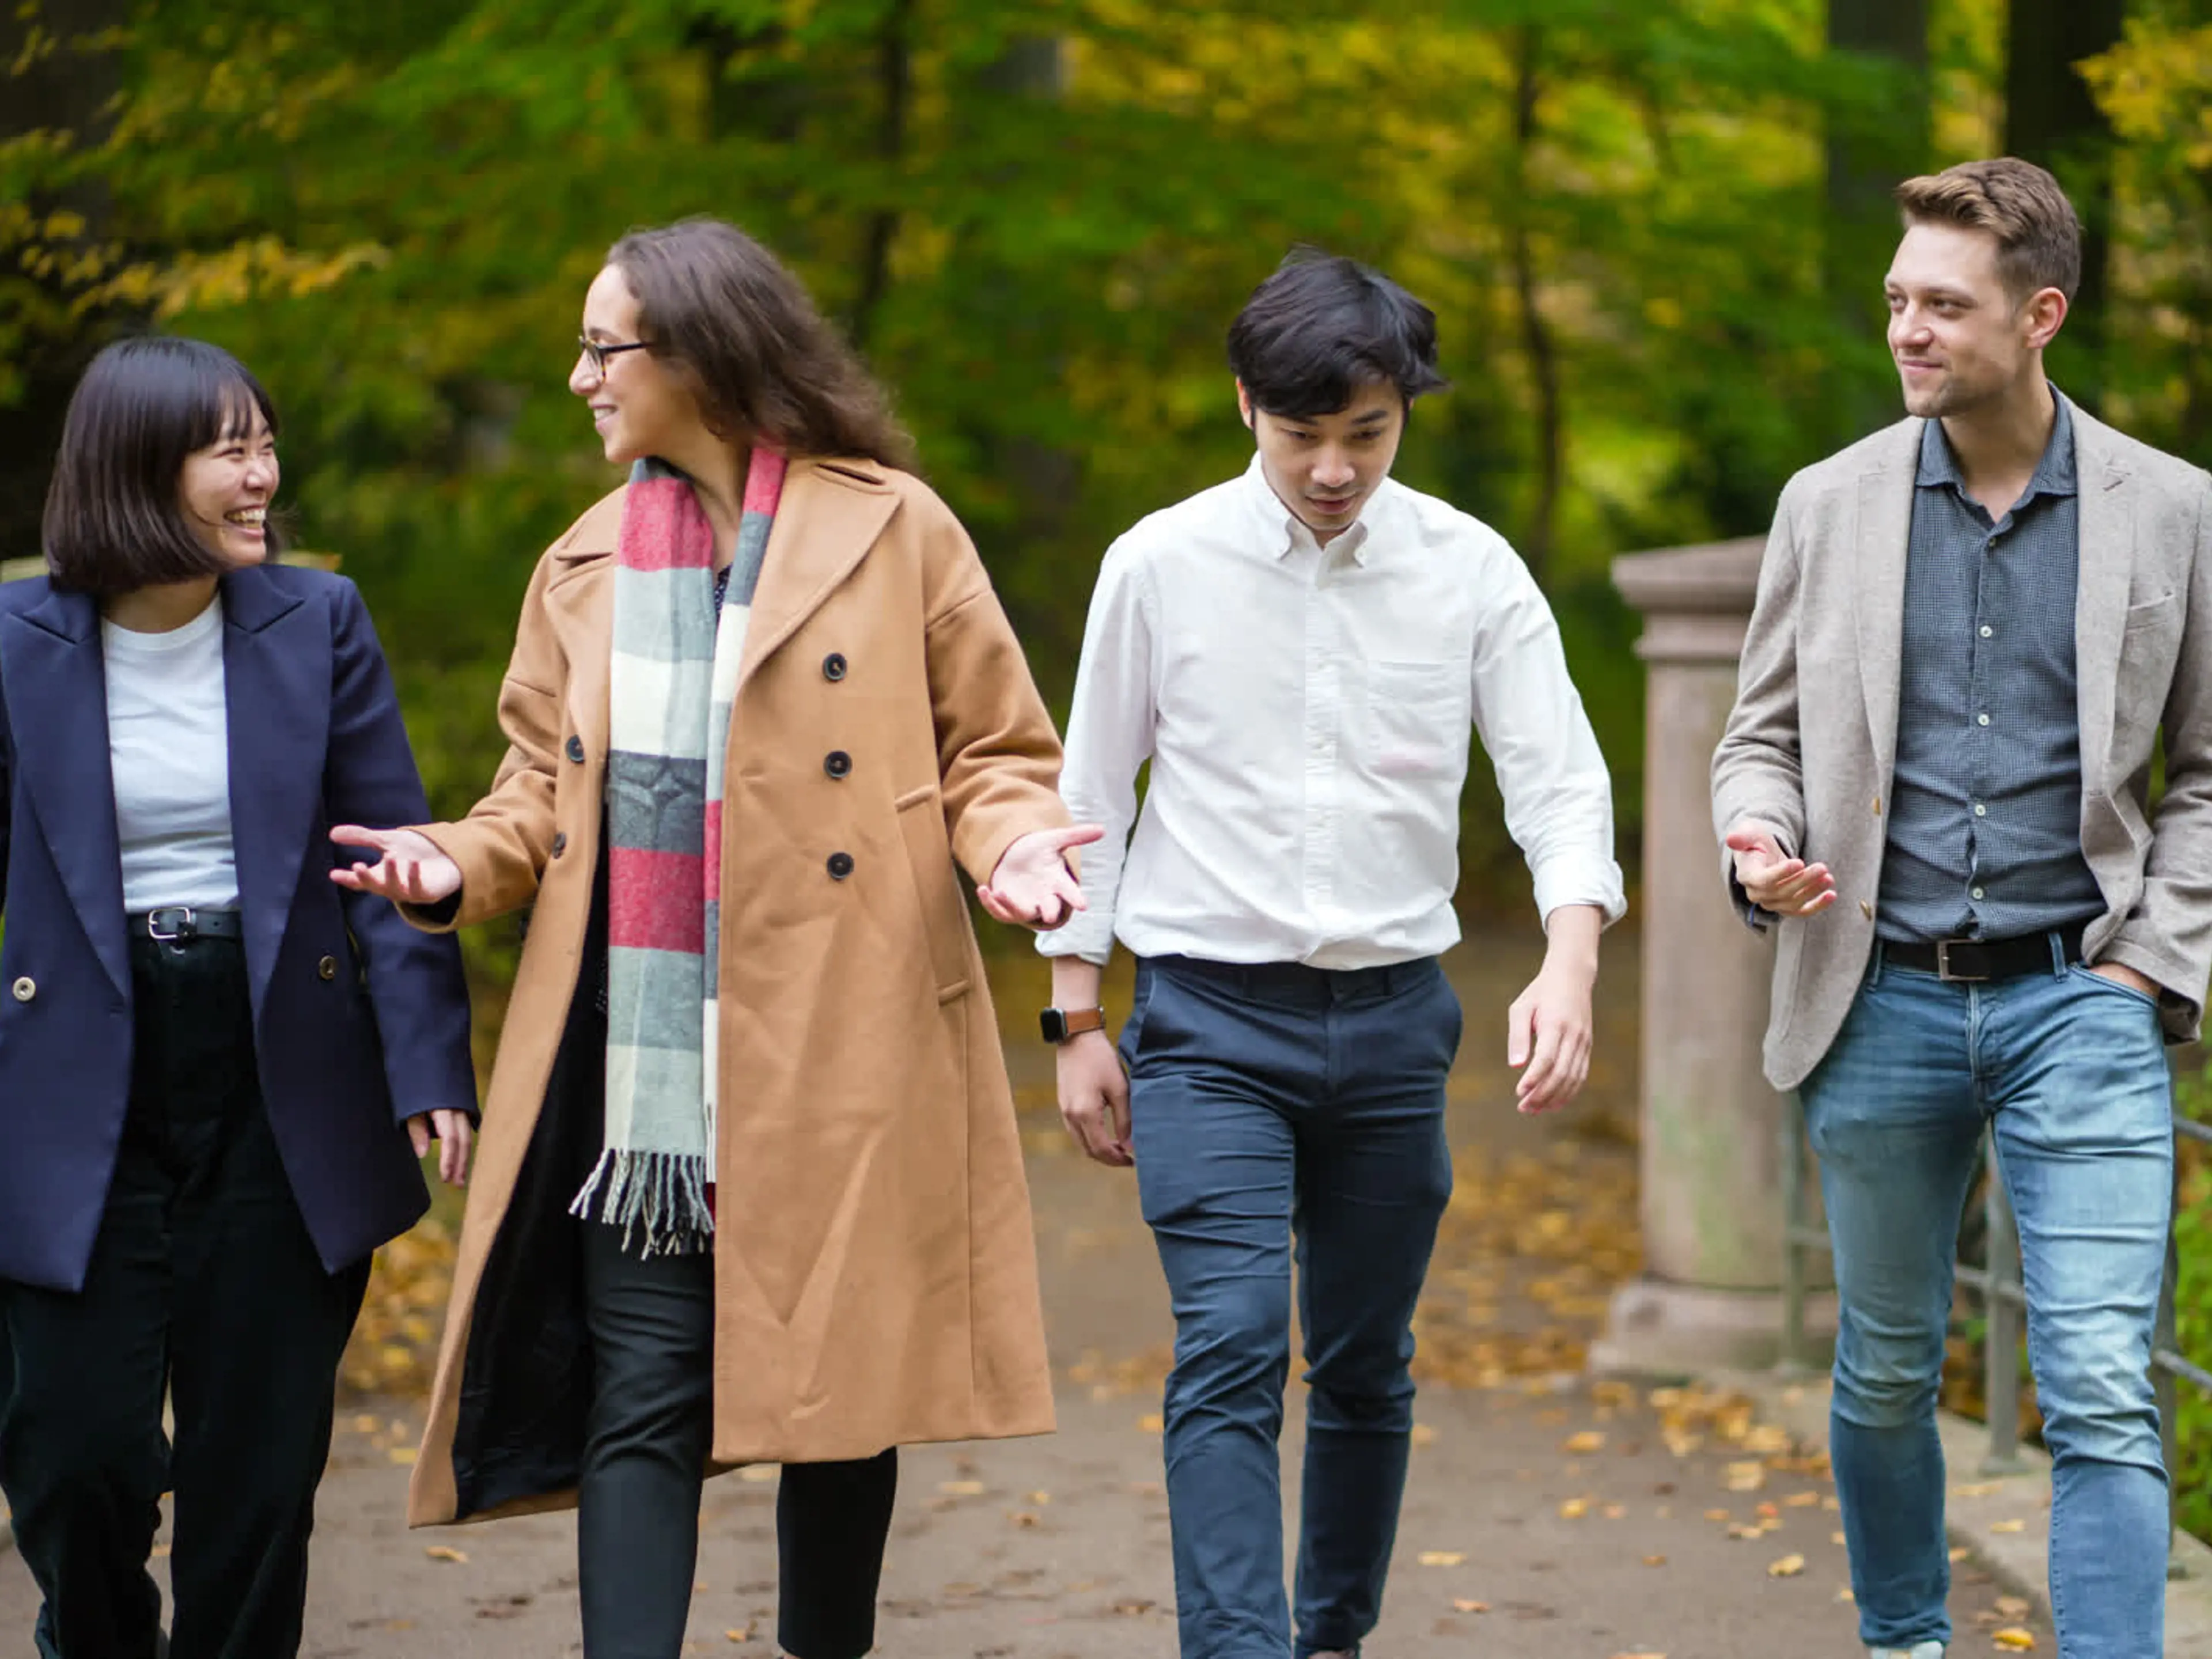 CBS Full-Time MBA students taking a walk in the park